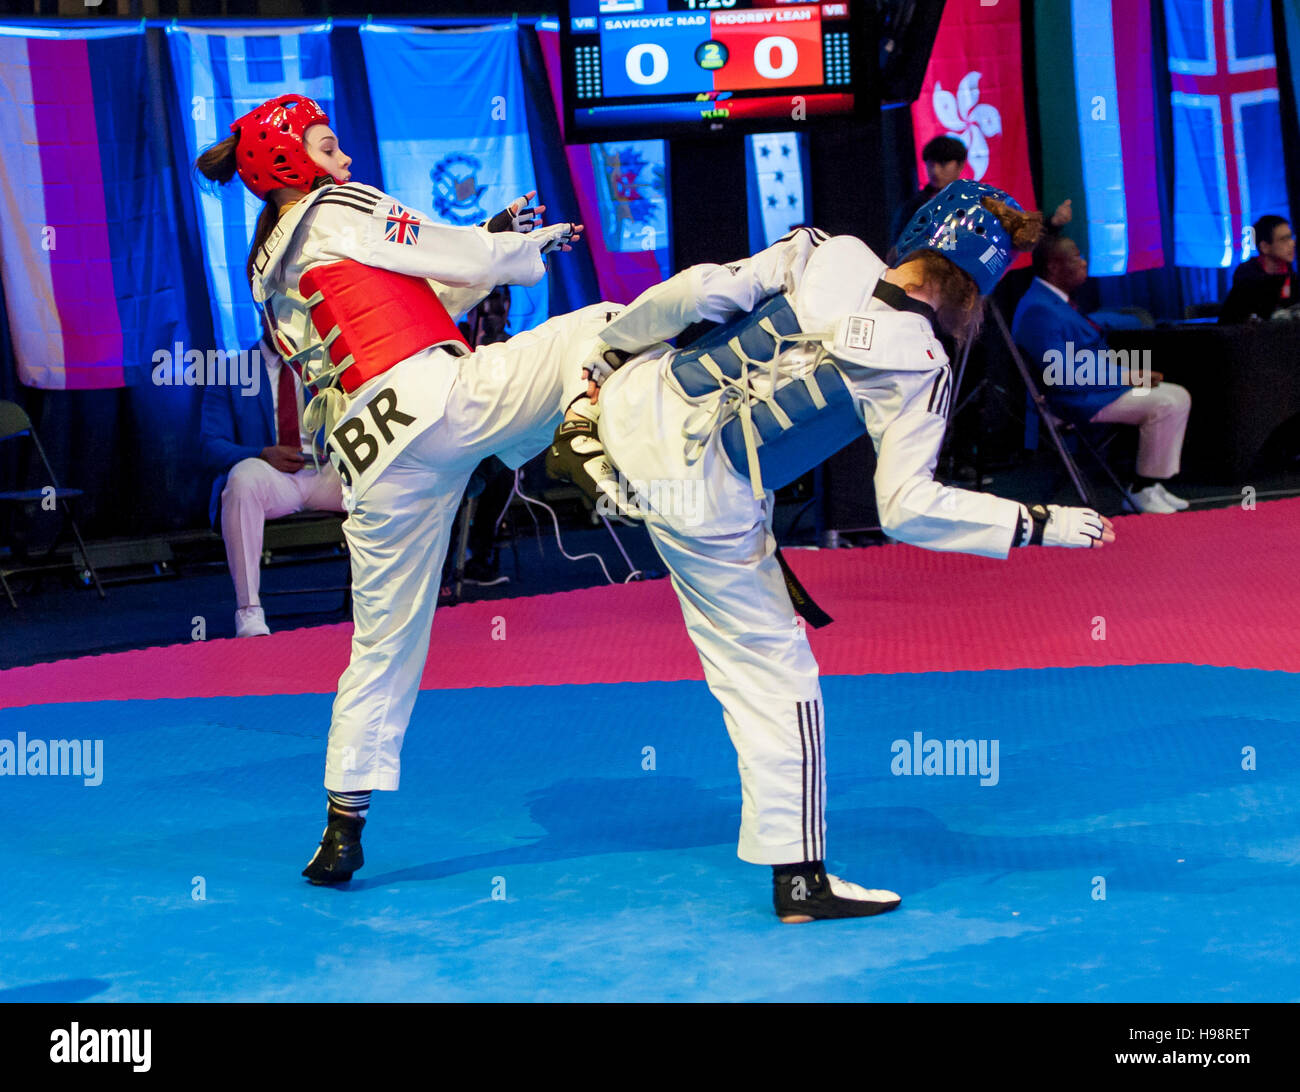 Burnaby, Canada. 19 November, 2016. WTF World Taekwondo Junior Championships Nadia Savkovic (SRB) blue, and Leah Moorby (GBR) red compete in the female 59kg Alamy Live News/Peter Llewellyn Stock Photo